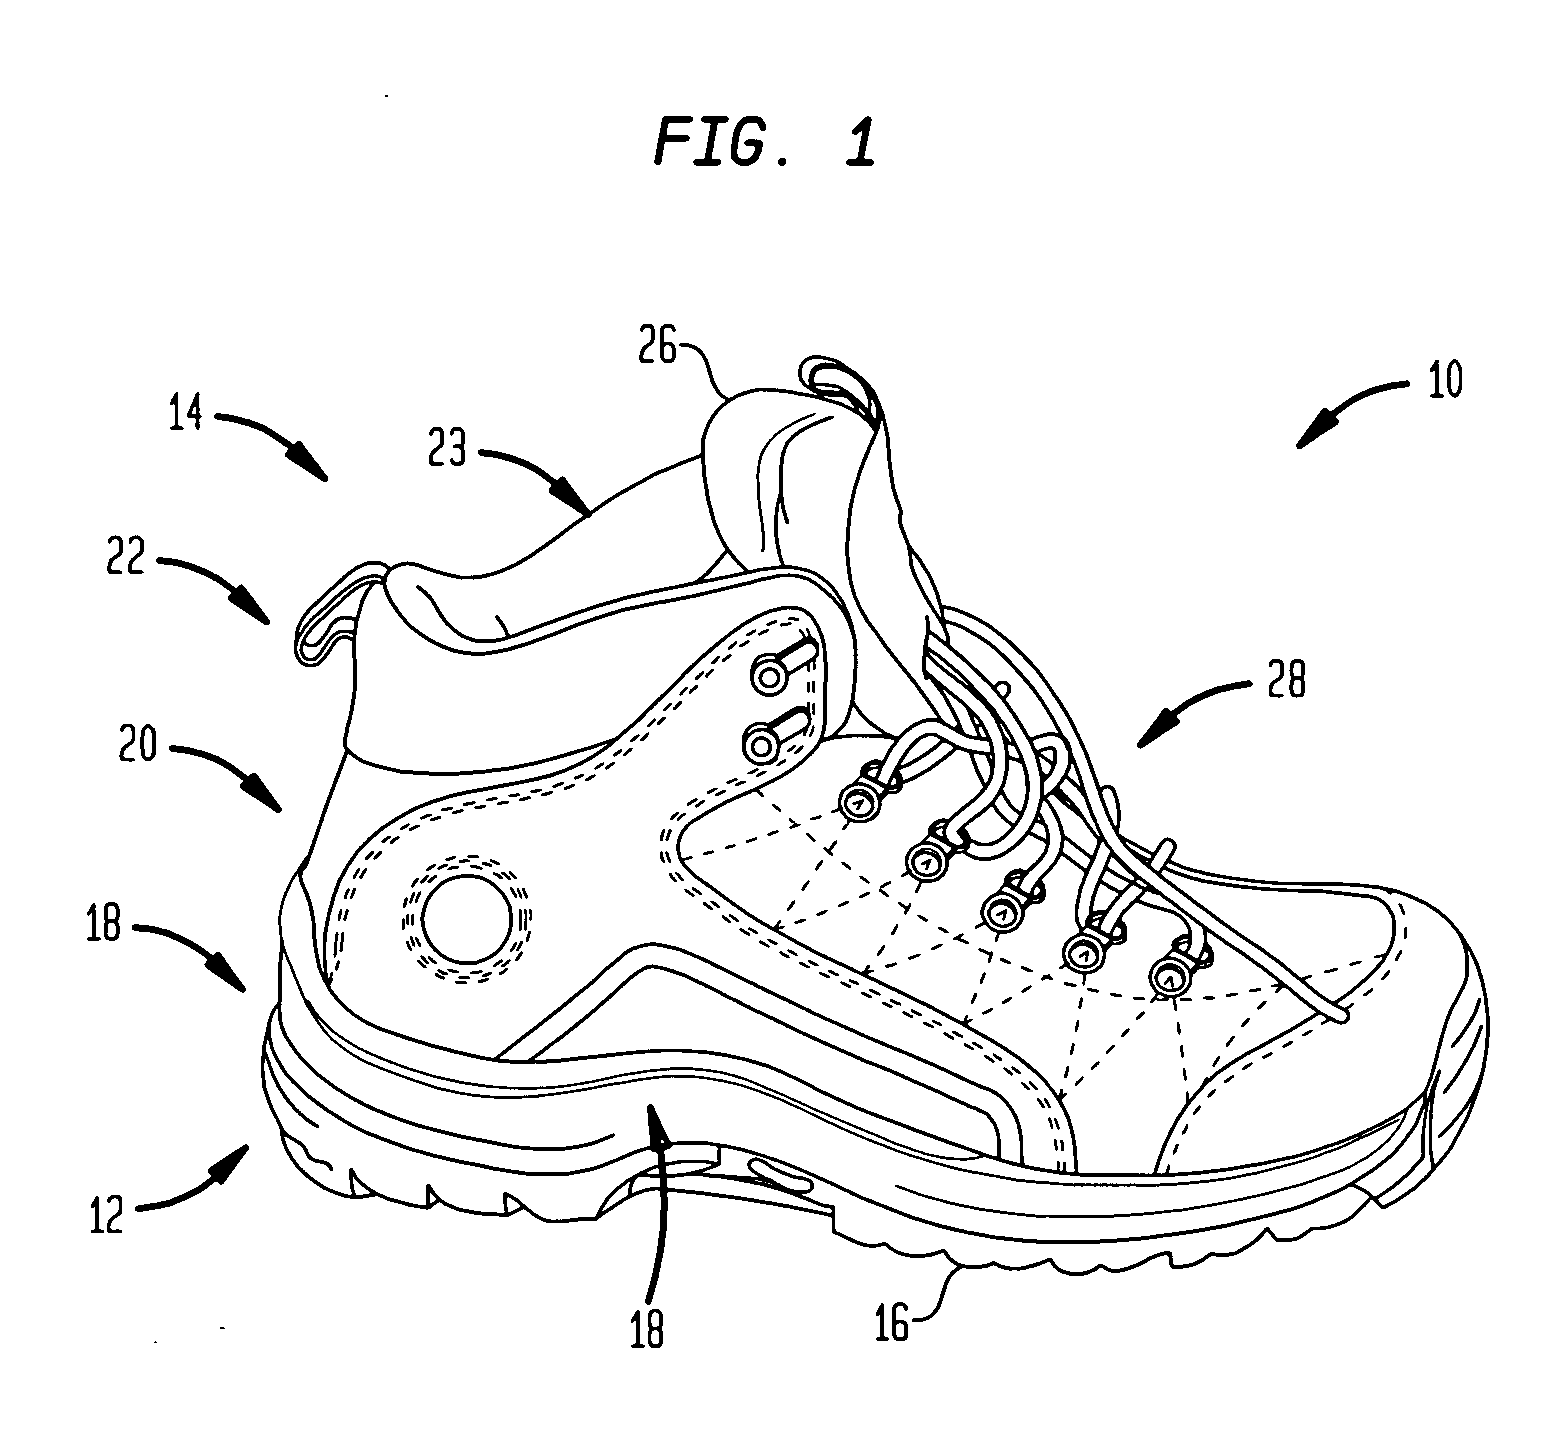 Removable or reversible lining for footwear